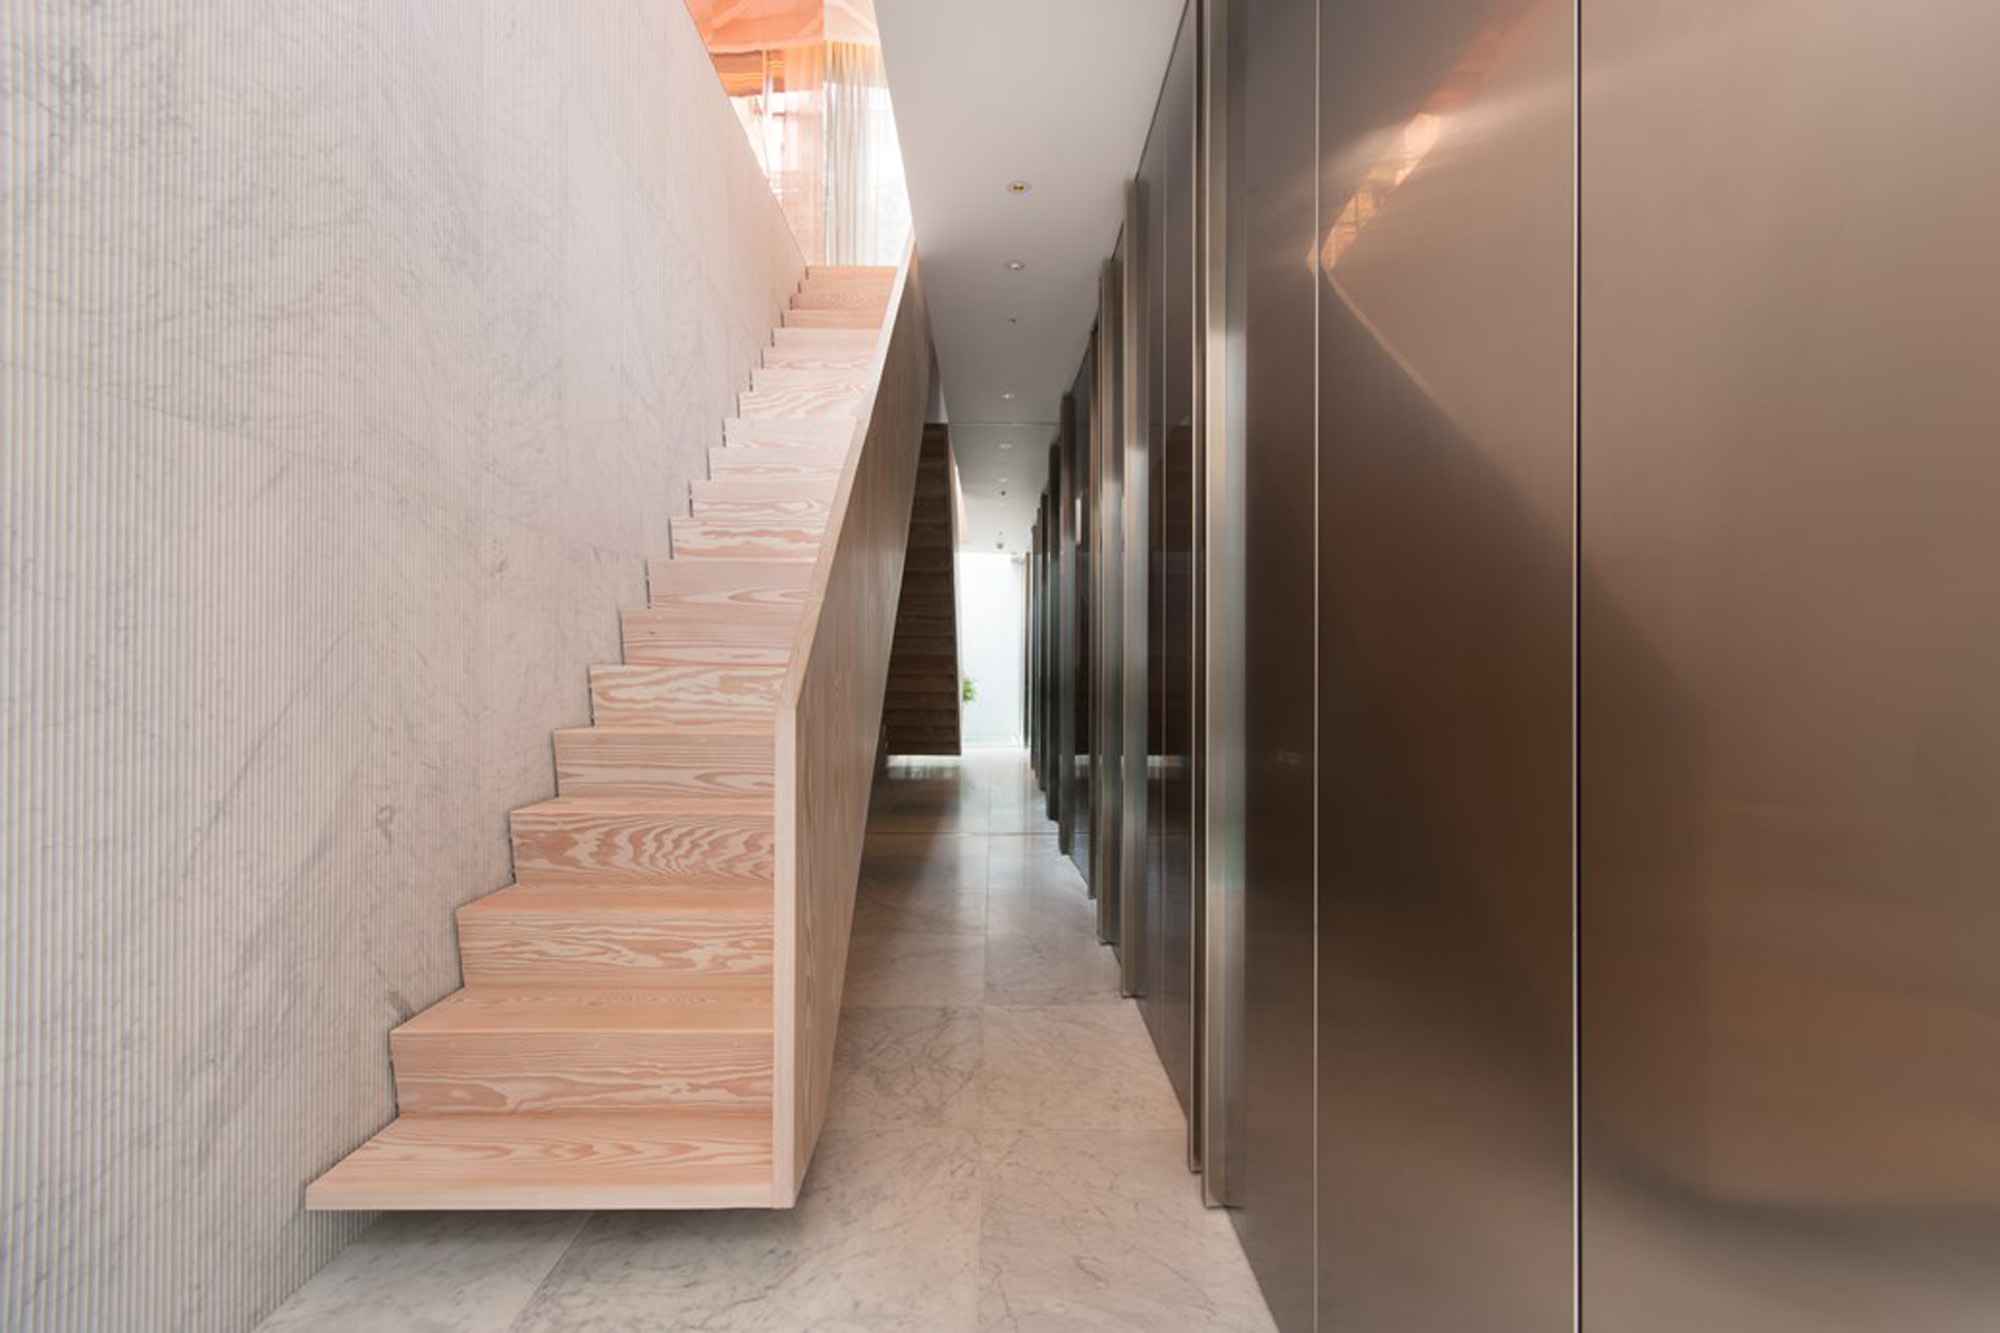 Corridor by Gianni Botsford - luxury architecture in London